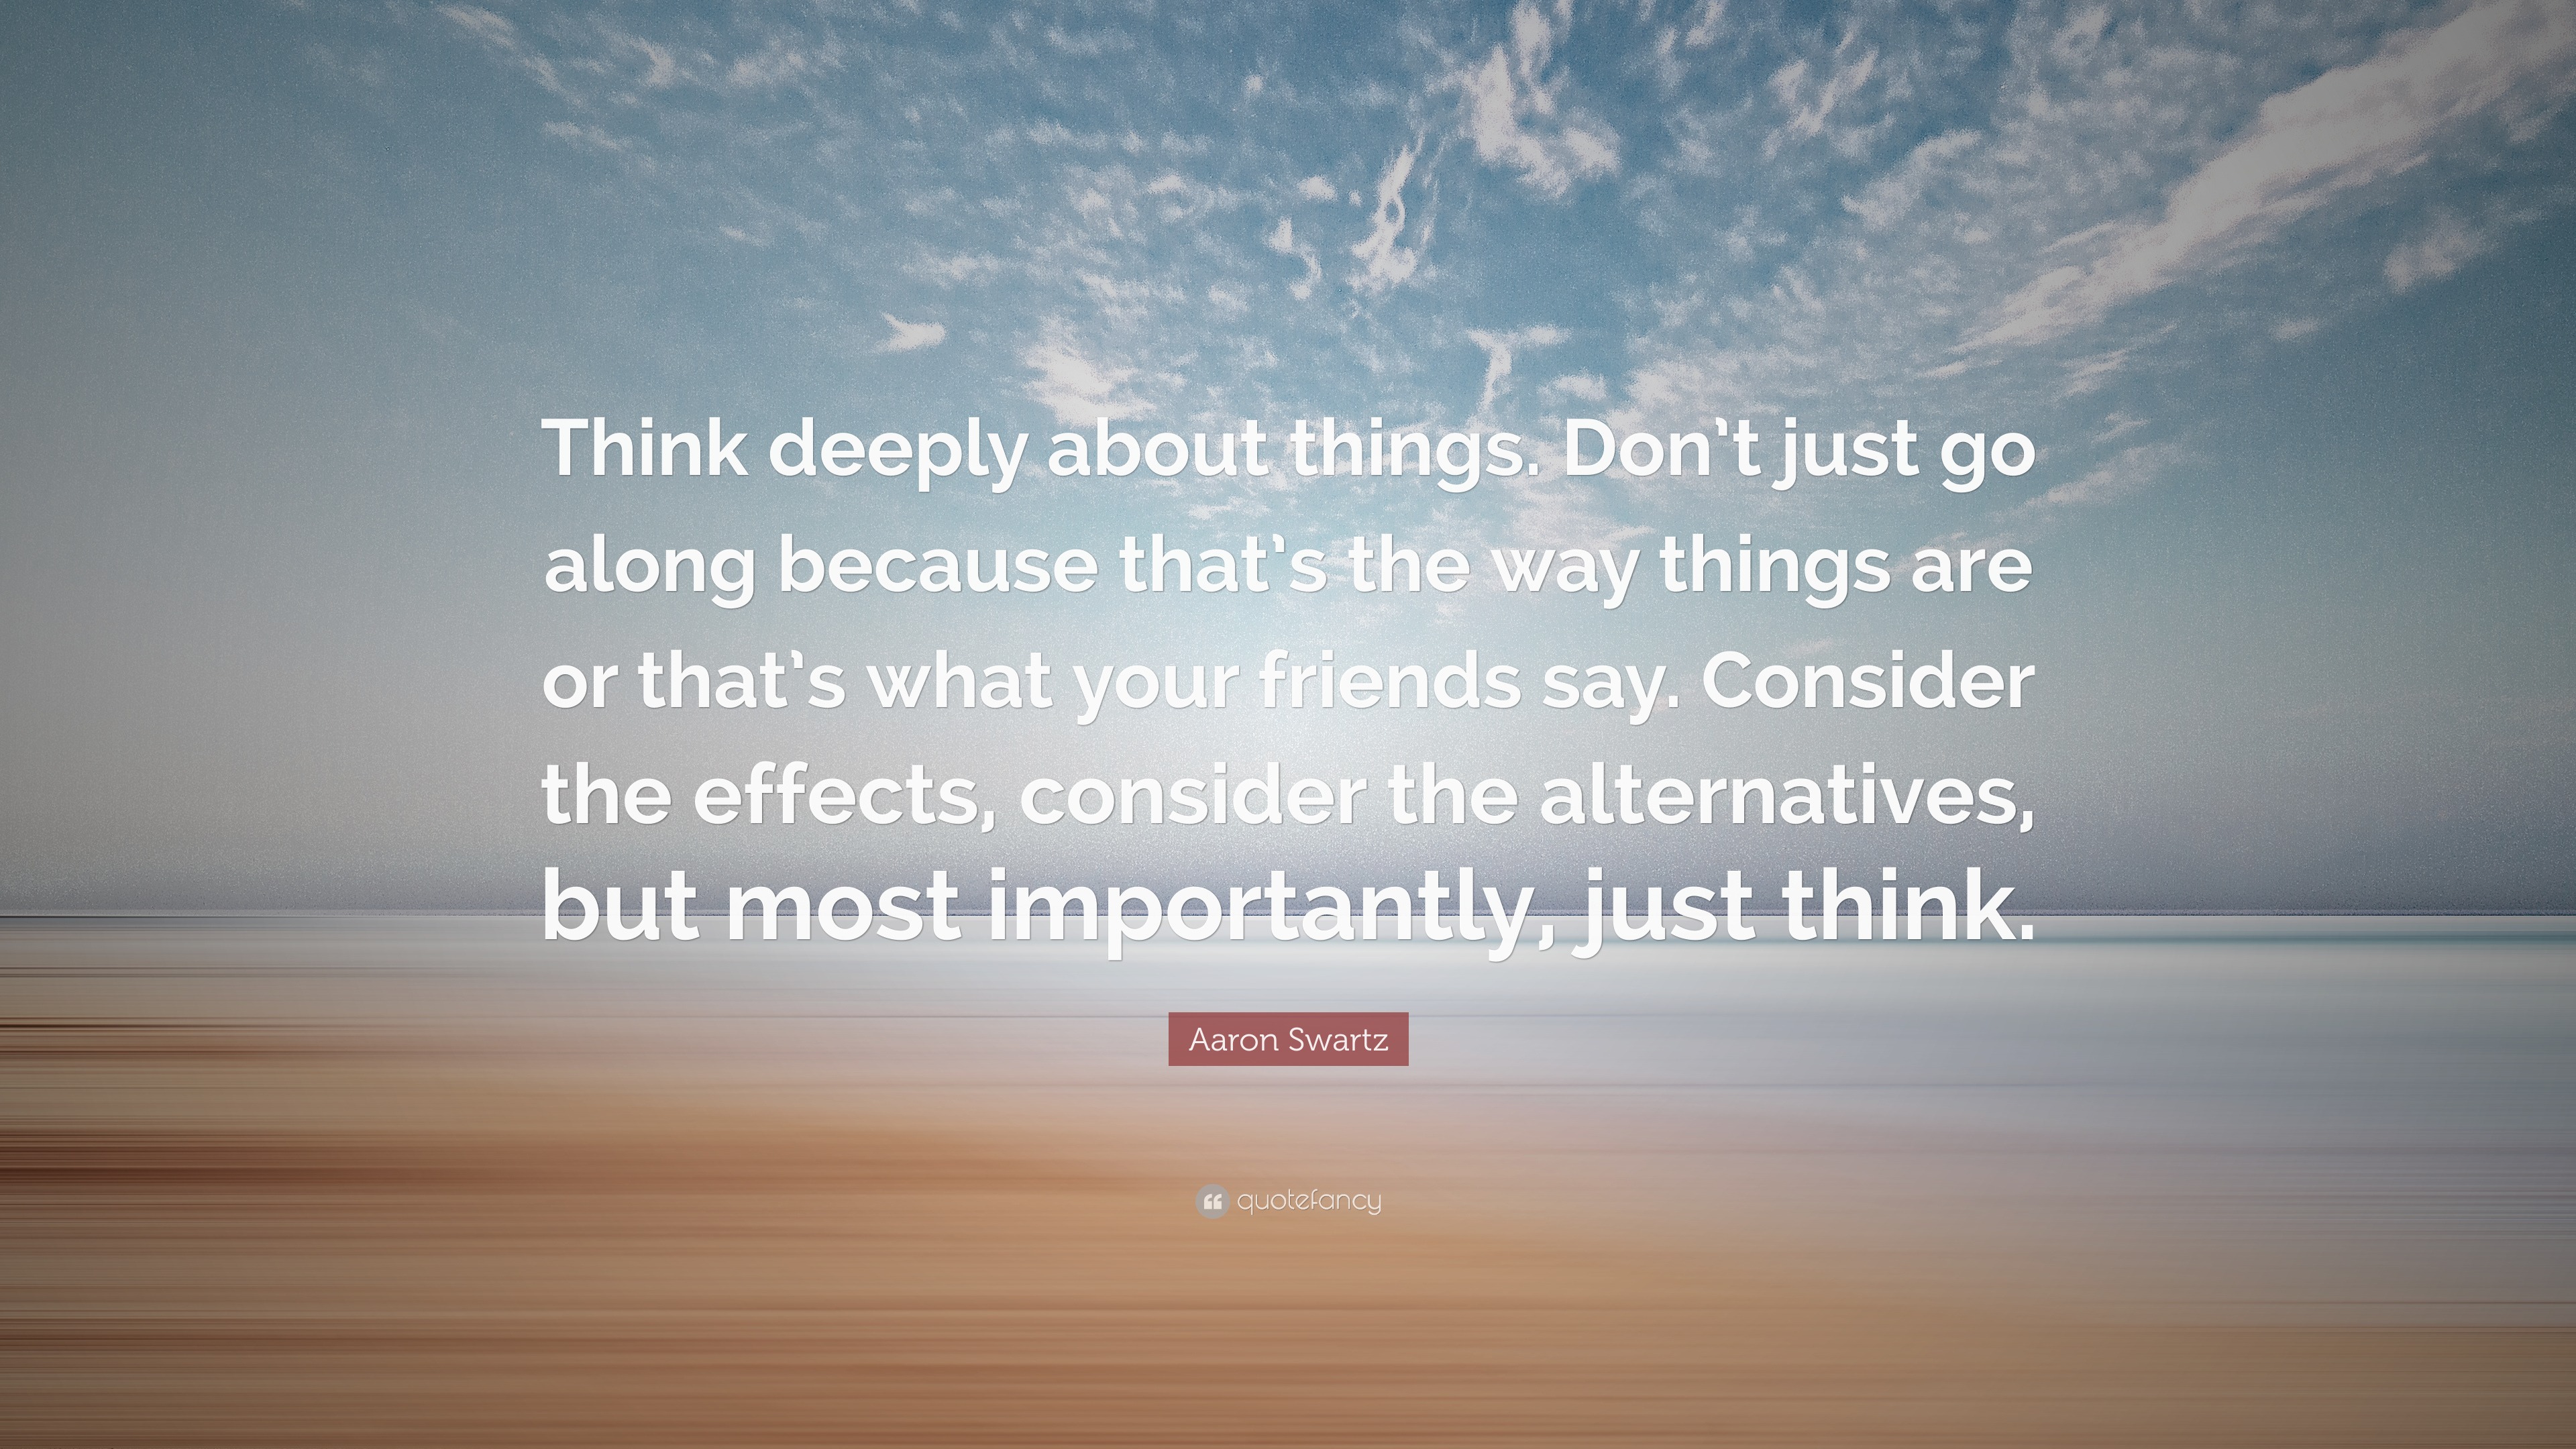 Aaron Swartz Quote: “Think deeply about things. Don’t just go along ...